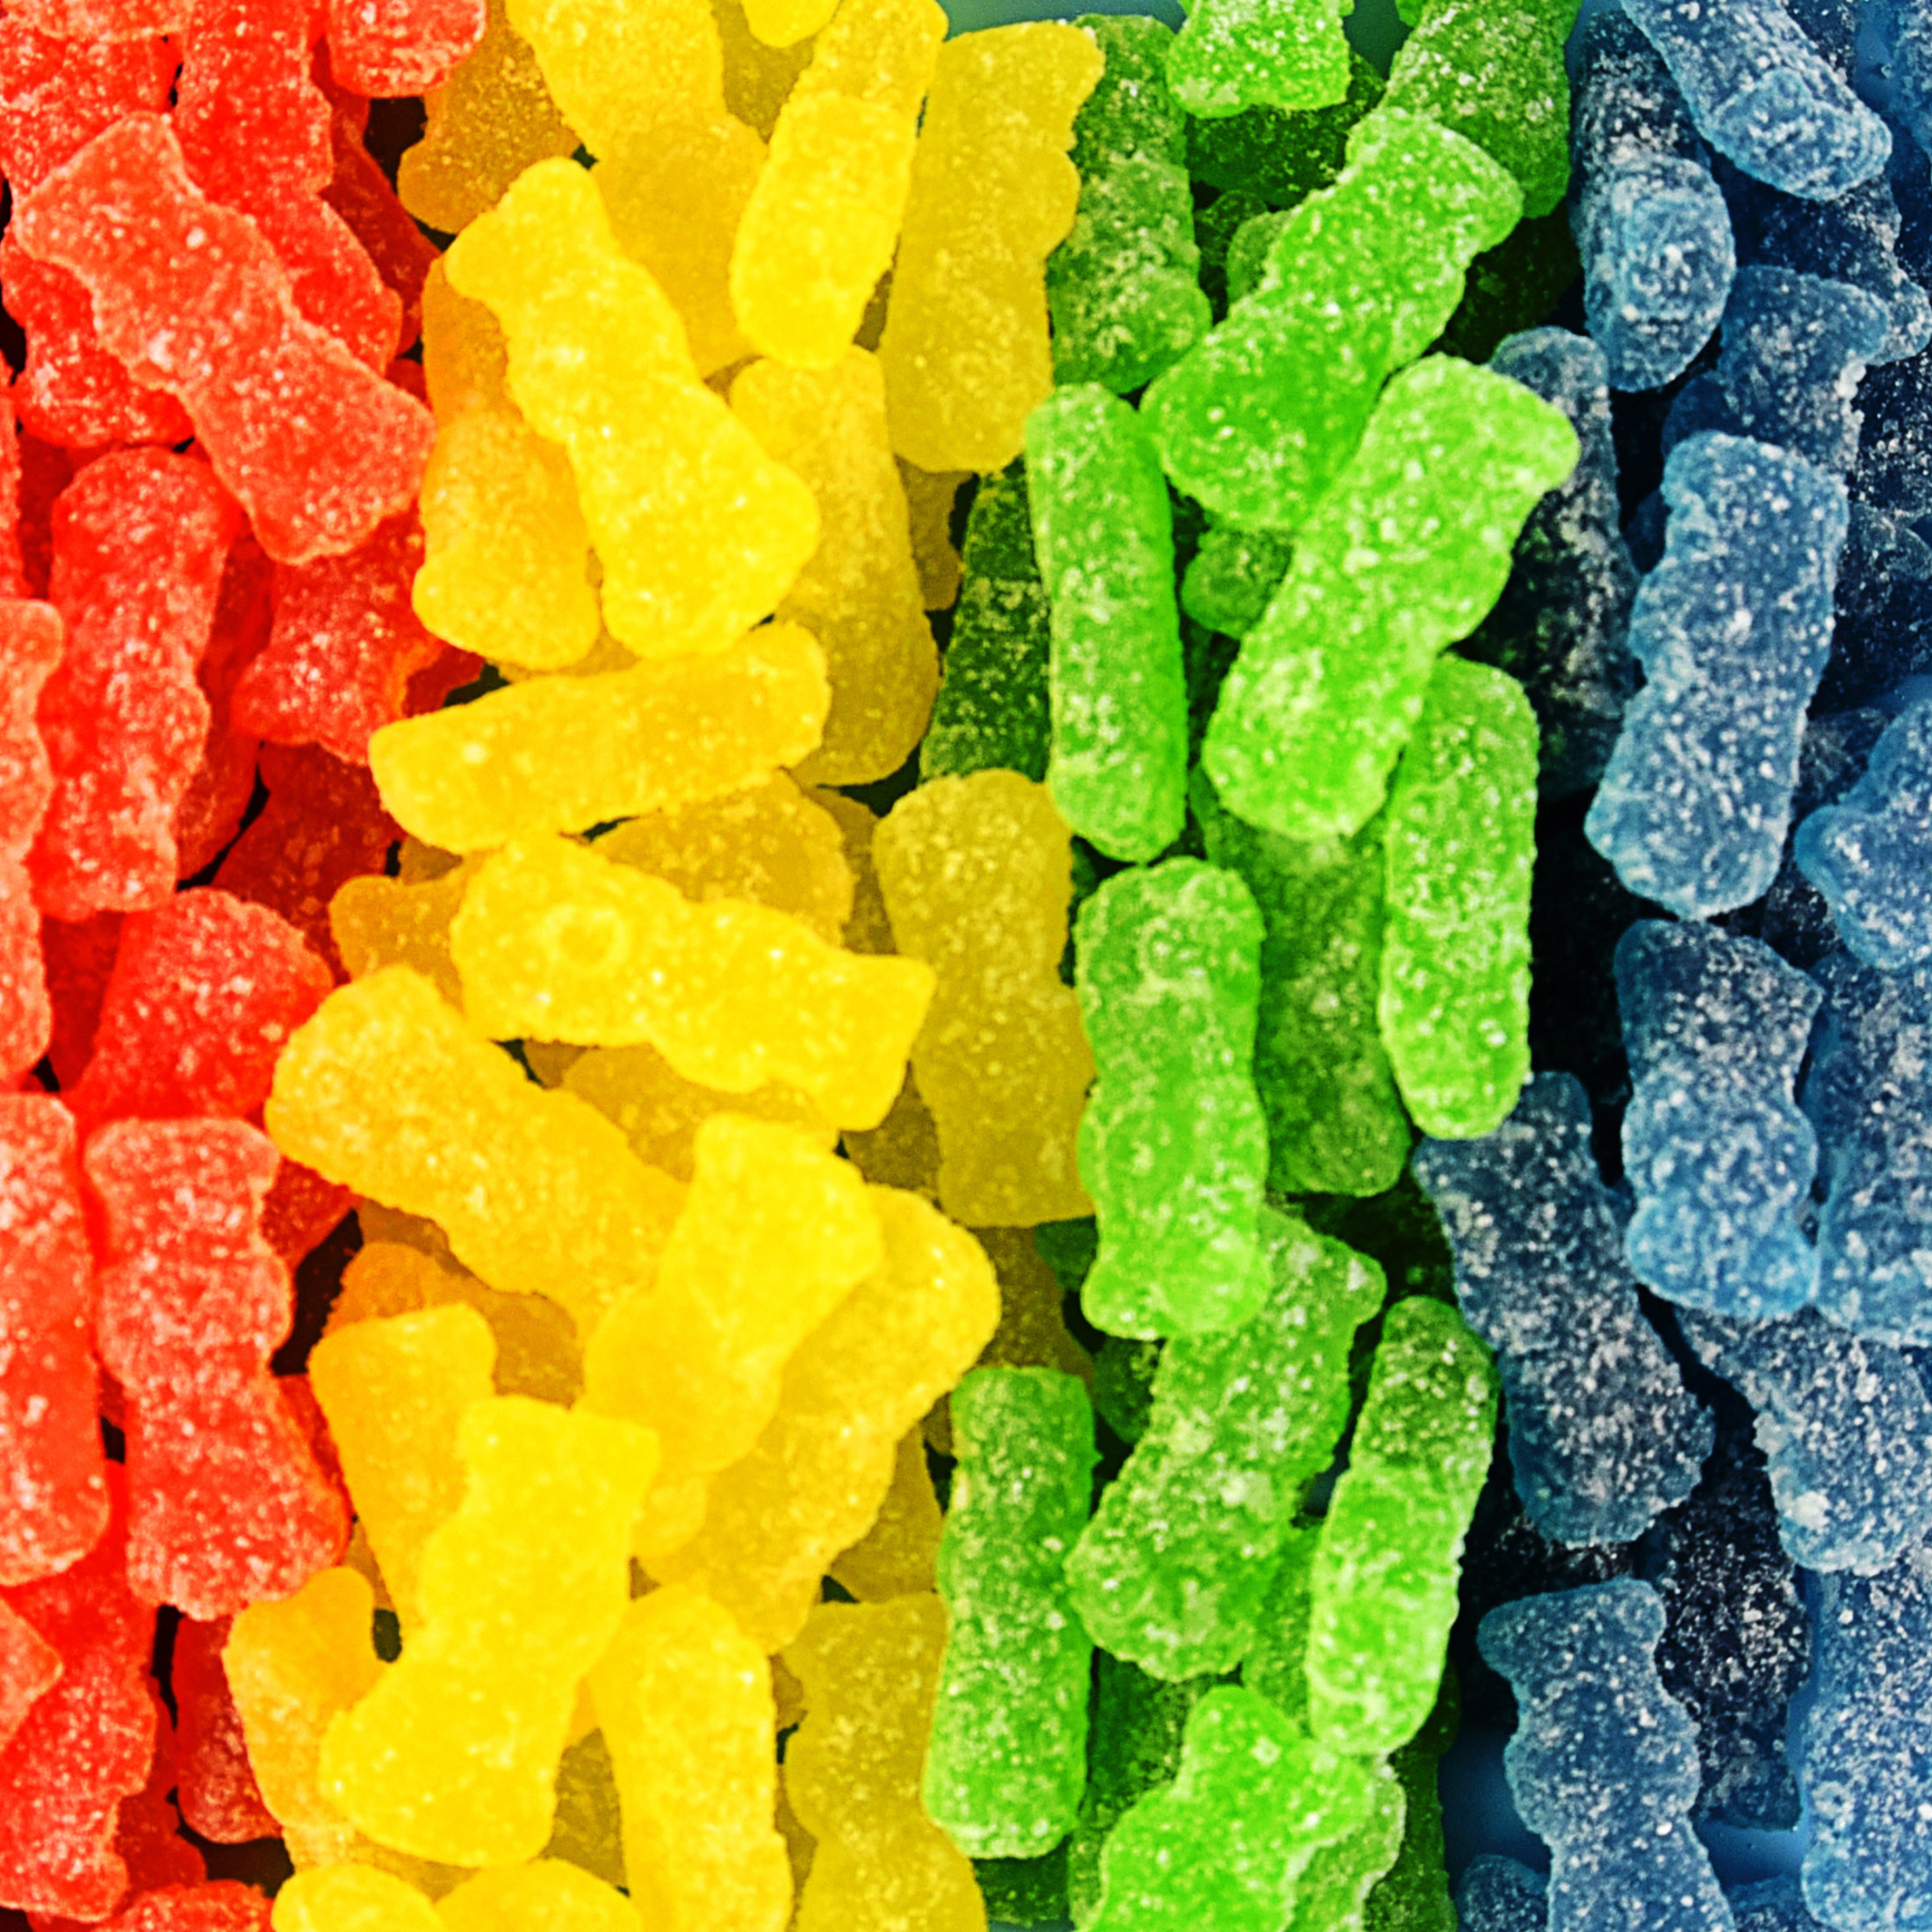 SOUR PATCH KIDS Soft & Chewy Candy, Family Size, 1.8 lb Bag - image 3 of 12